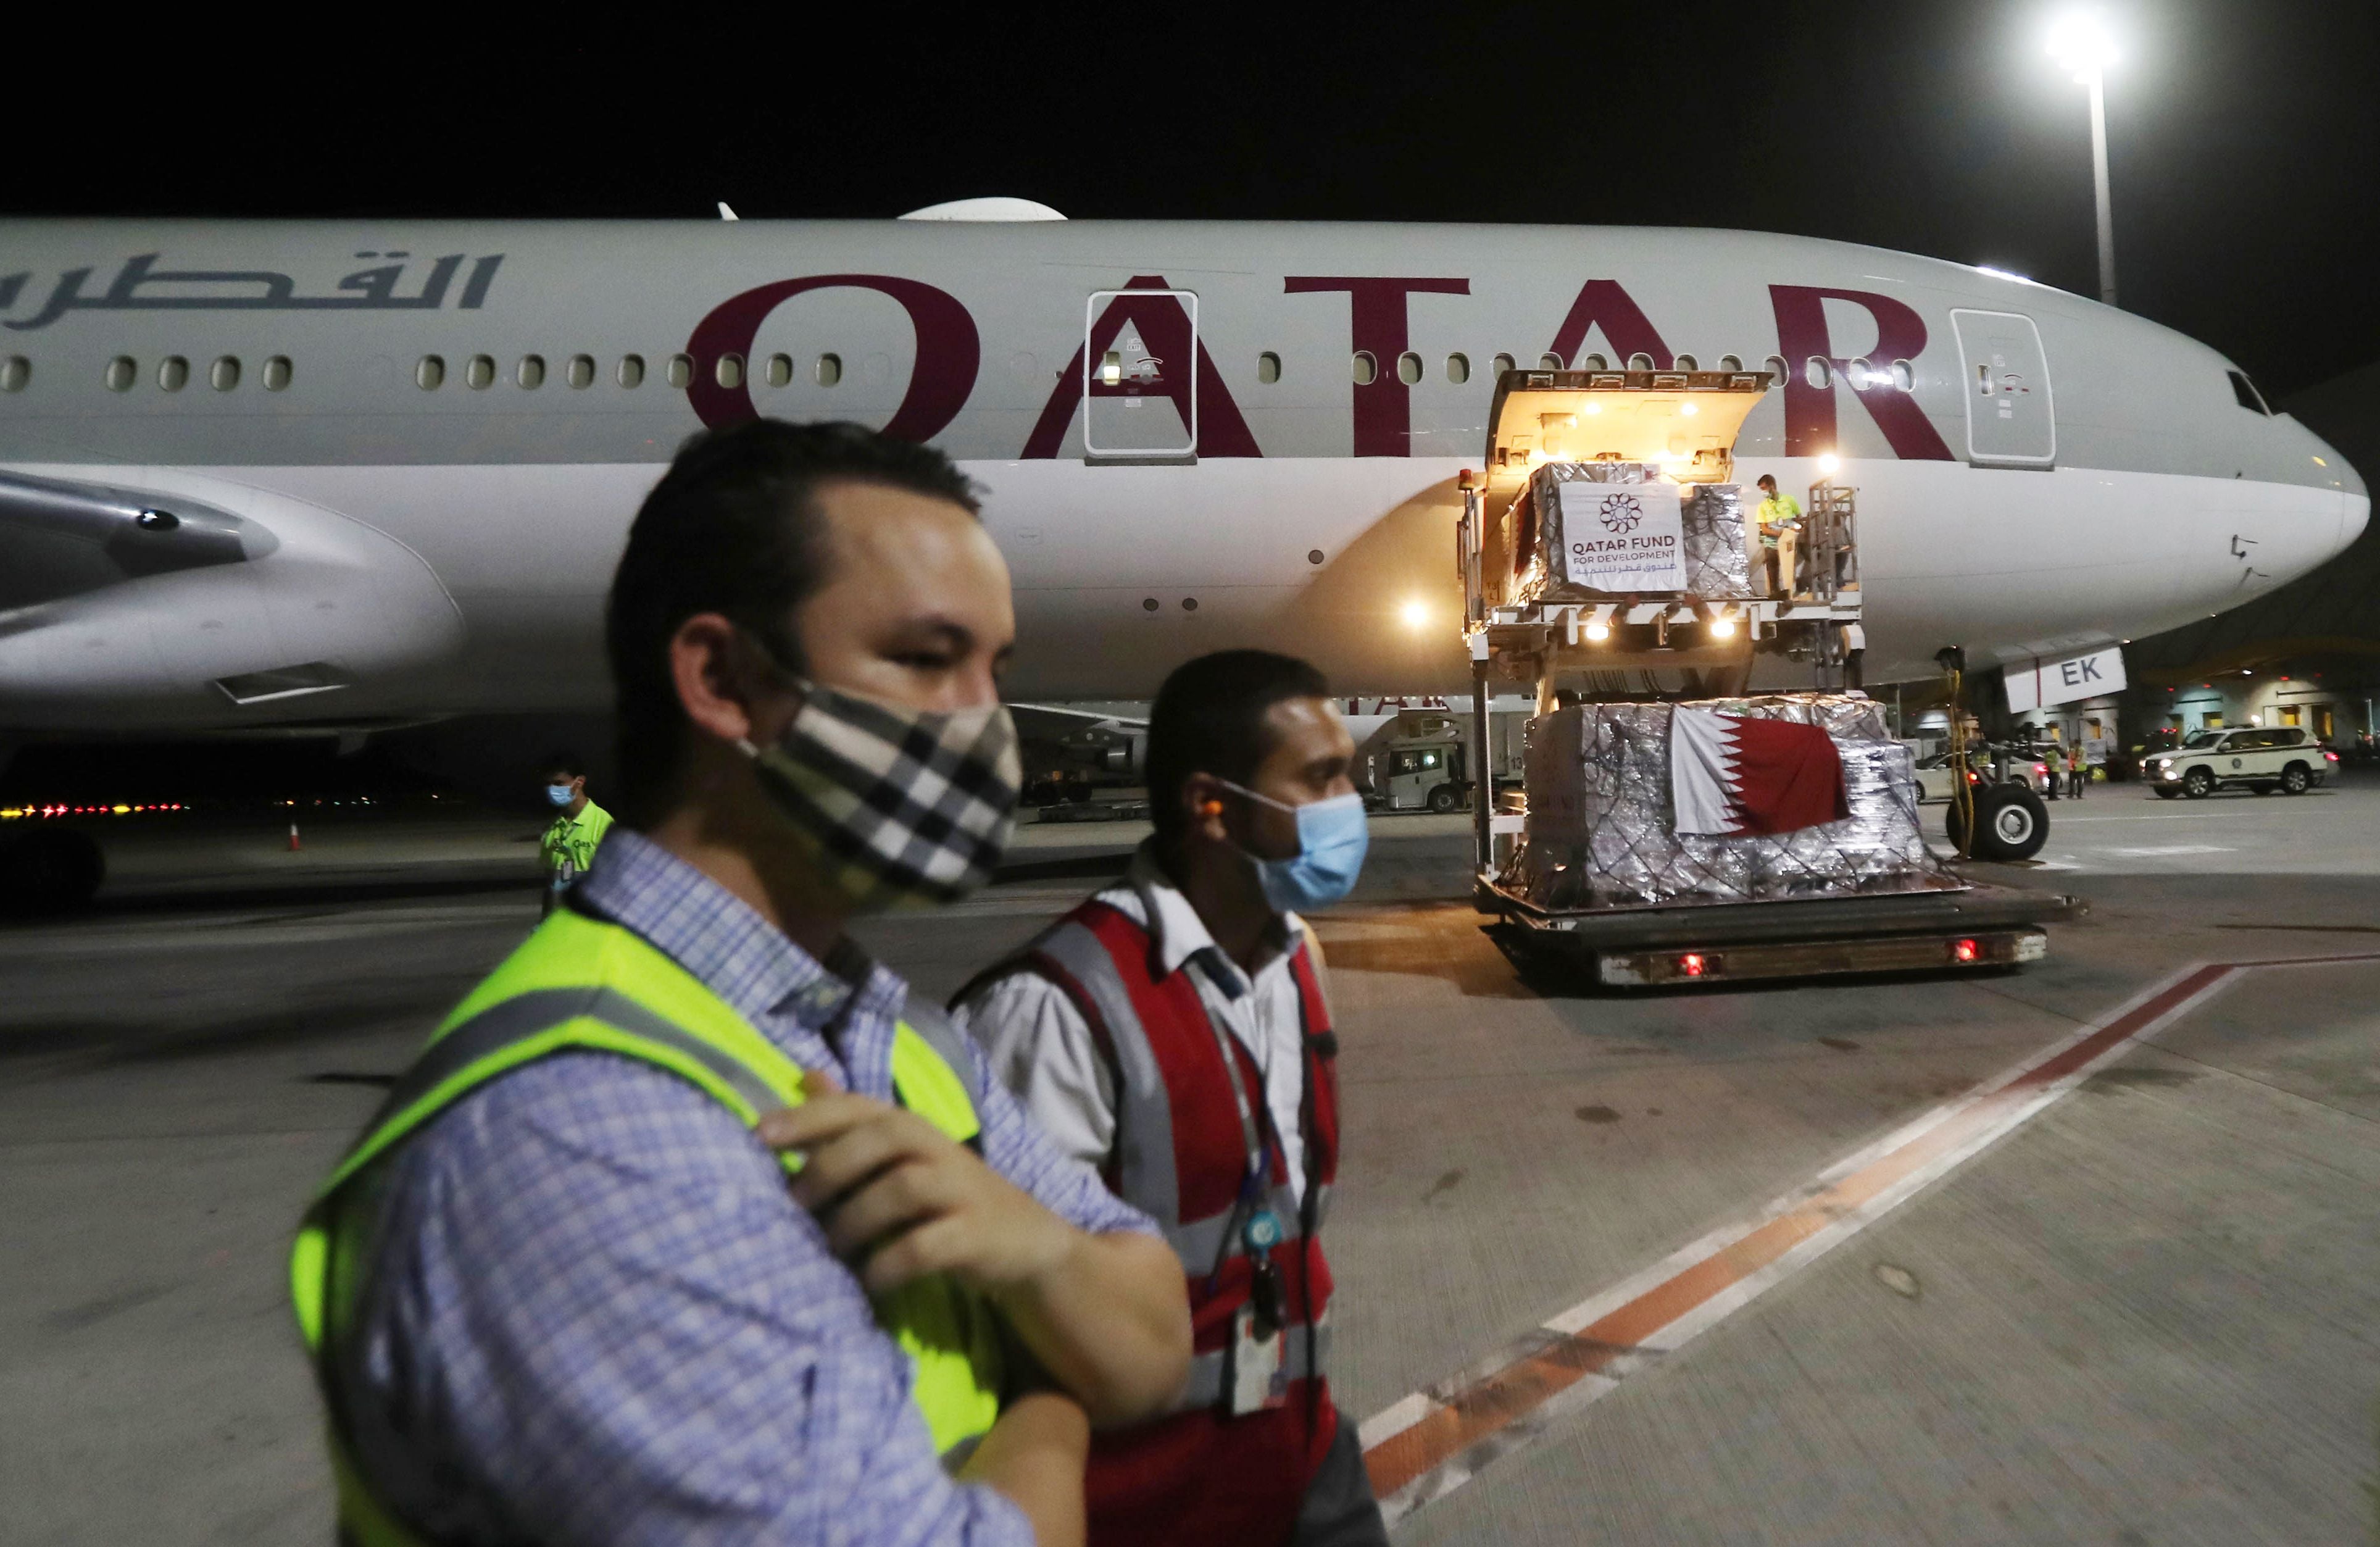 Revelations that passengers flying through Doha were forced to endure vaginal inspections have upended Qatar's efforts to boost its reputation before the Gulf state hosts World Cup 2022, experts say. Officers marched women off a Sydney-bound Qatar Airways flight earlier this month and forced them to undergo intimate examinations after a newborn baby was found abandoned in an airport bathroom. (Photo by KARIM JAAFAR / AFP) (Photo by KARIM JAAFAR/AFP via Getty Images)